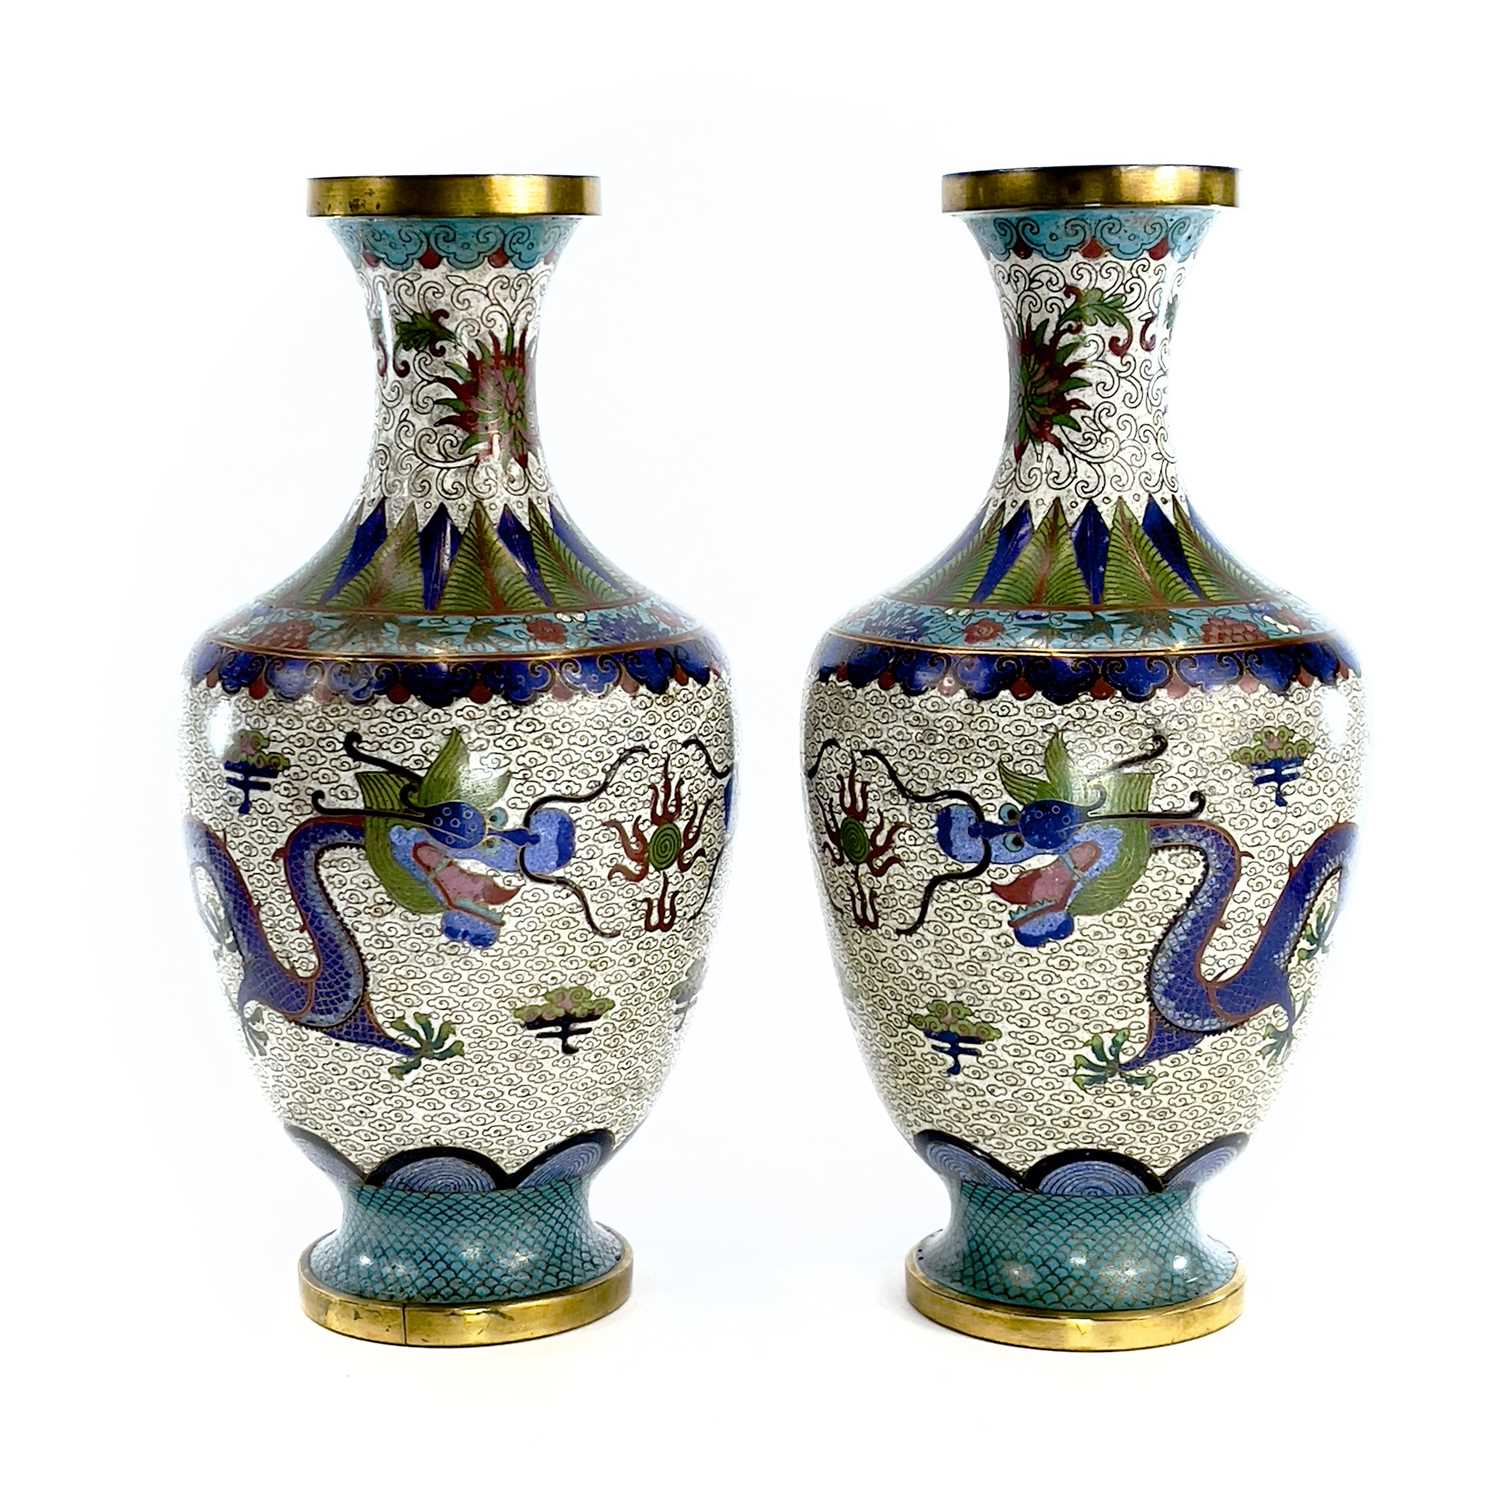 A pair of Chinese cloisonne vases, early 20th century, the white ground decorated with dragons - Image 3 of 11